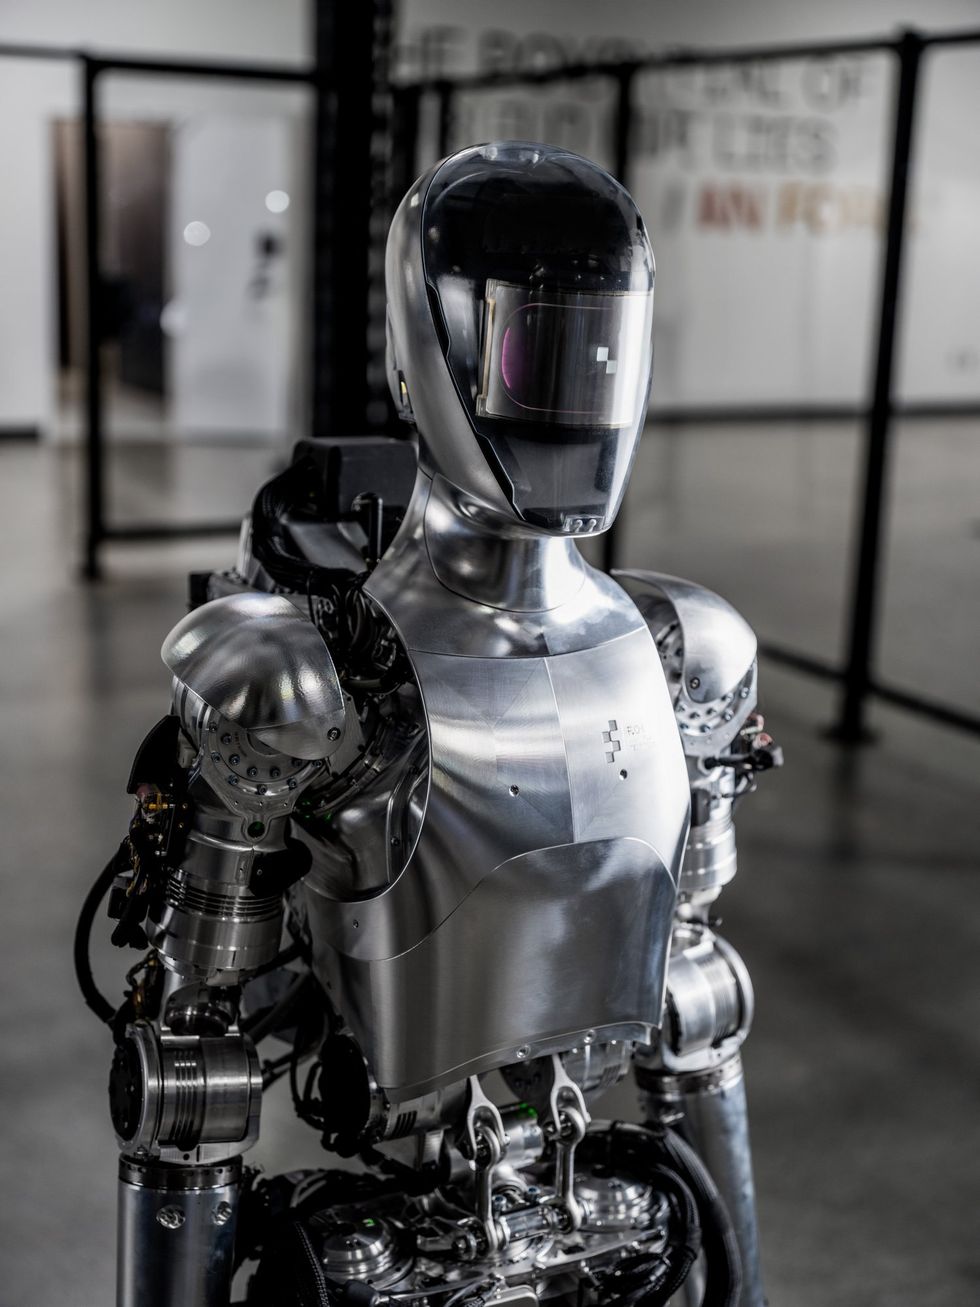 A close-up photograph of a slim humanoid robot standing with shiny metal skin and a black motorcycle helmet.